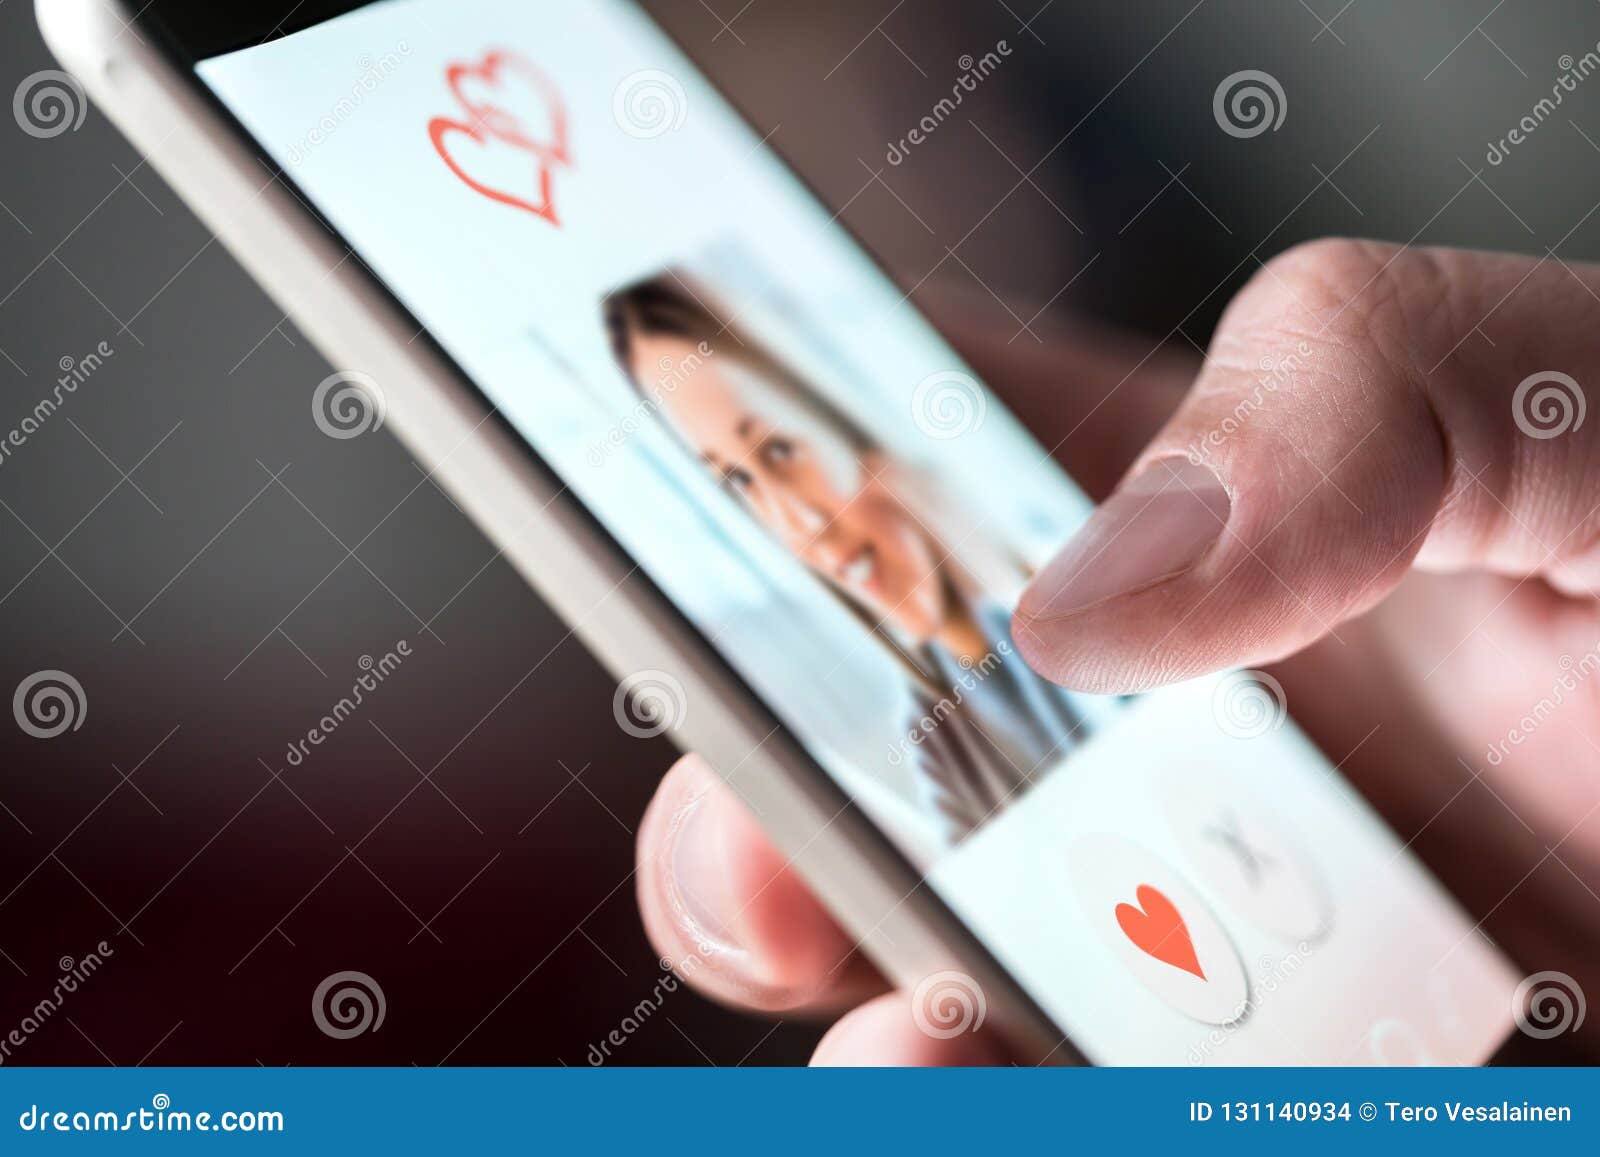 online dating app in smartphone. man looking at photo of beautiful woman.